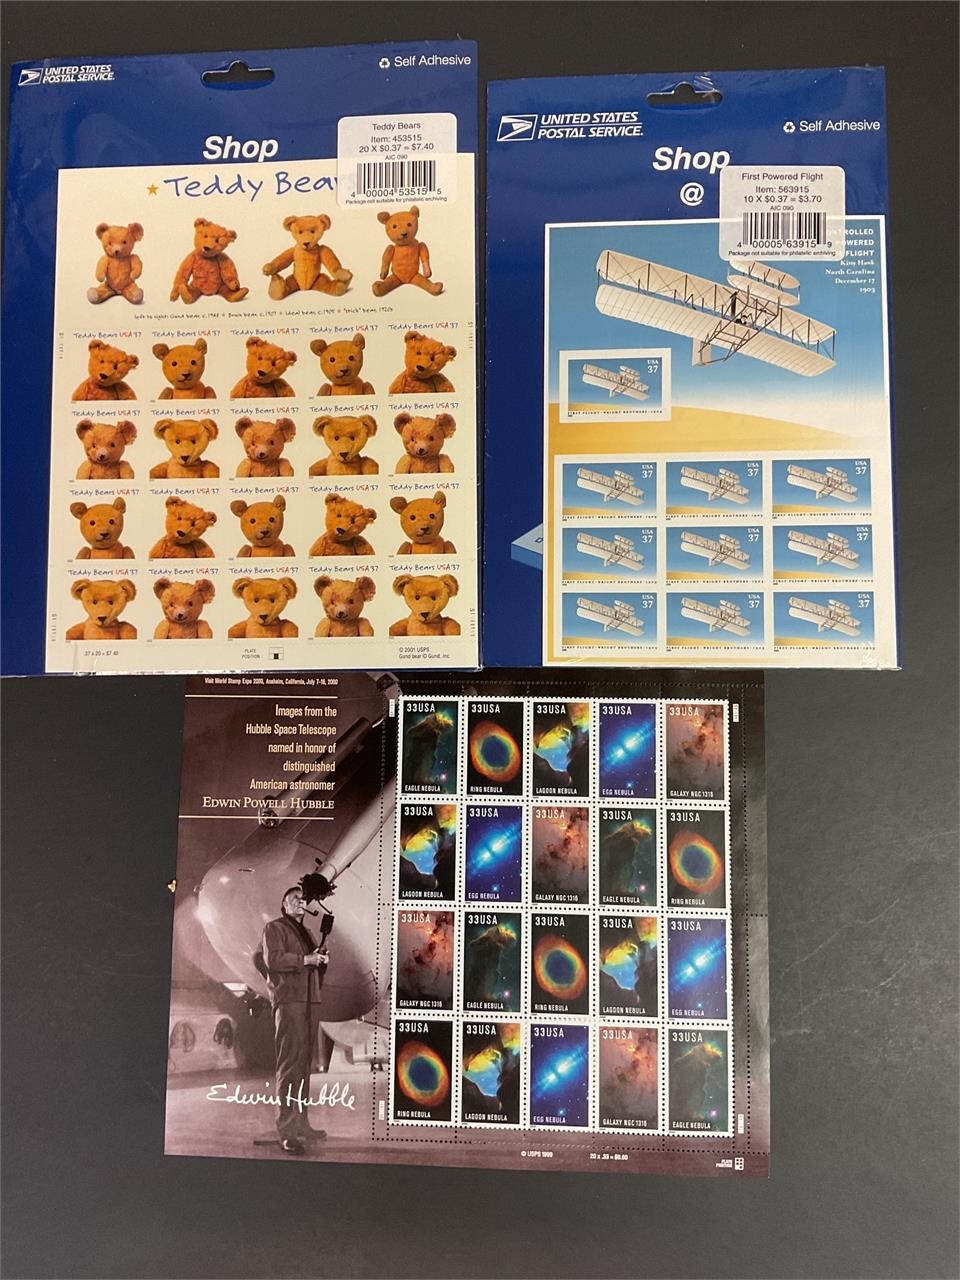 Collectible sheets of stamps